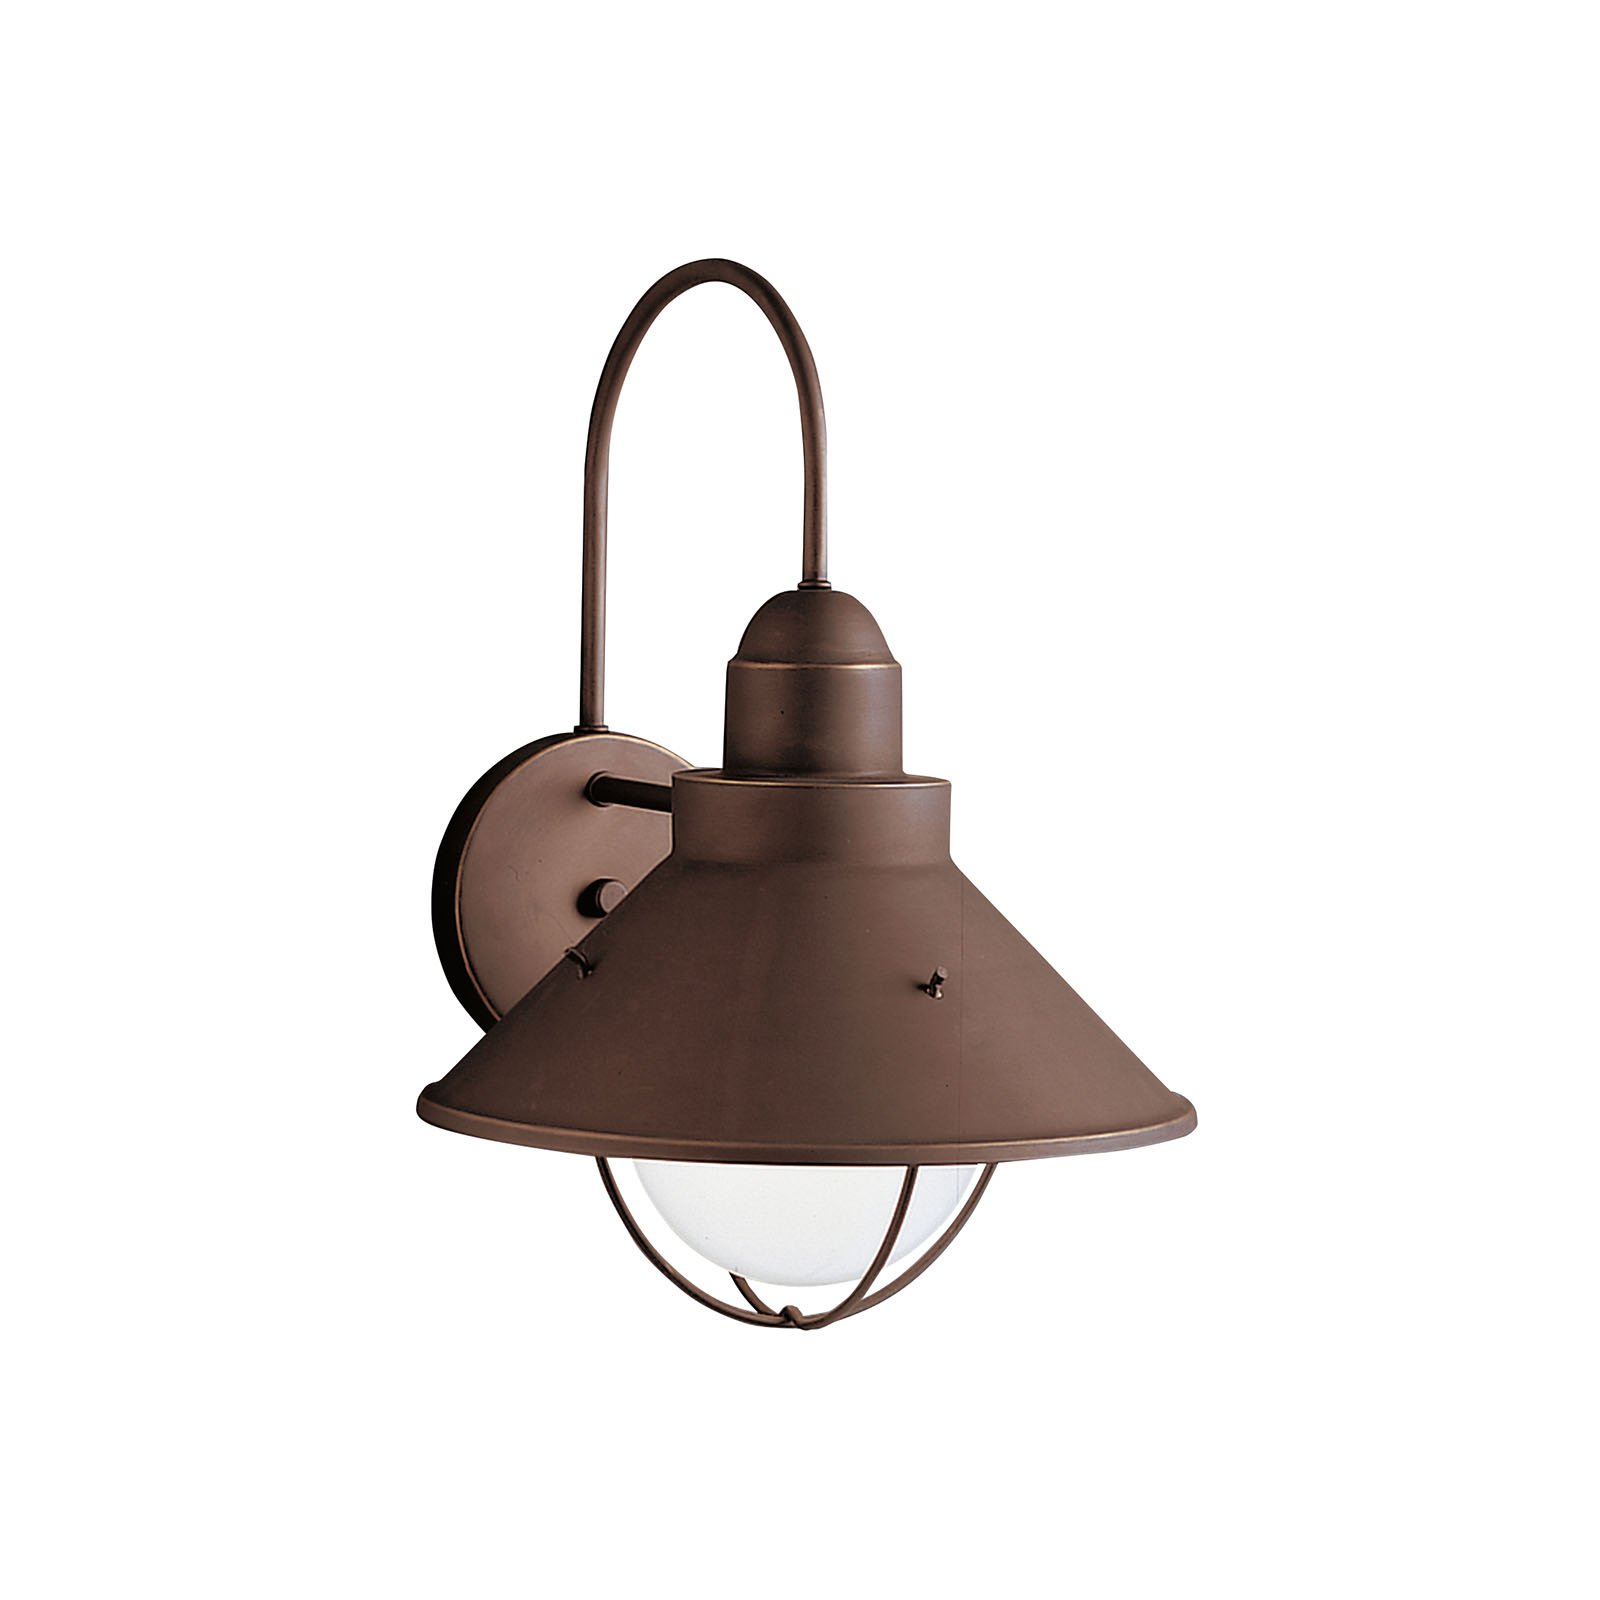 With an aura that is as pure as a sea breeze, the Seaside(TM)Collection offers the homeowner a unique line of outdoor fixtures guaranteed to bring a new identity to your home's landscape. For this 1-light Seaside(TM)Wall Lantern, aluminum with stainless steel is combined with Kichler's Olde Bronze finish, resulting in a high quality fit that will look fantastic for years to come. The fixture houses a 150-watt (max.) bulb that provides outstanding outdoor illumination for your landscape. It is 14.5in. high, is U.L. listed for wet location and is Dark Skies compliant.